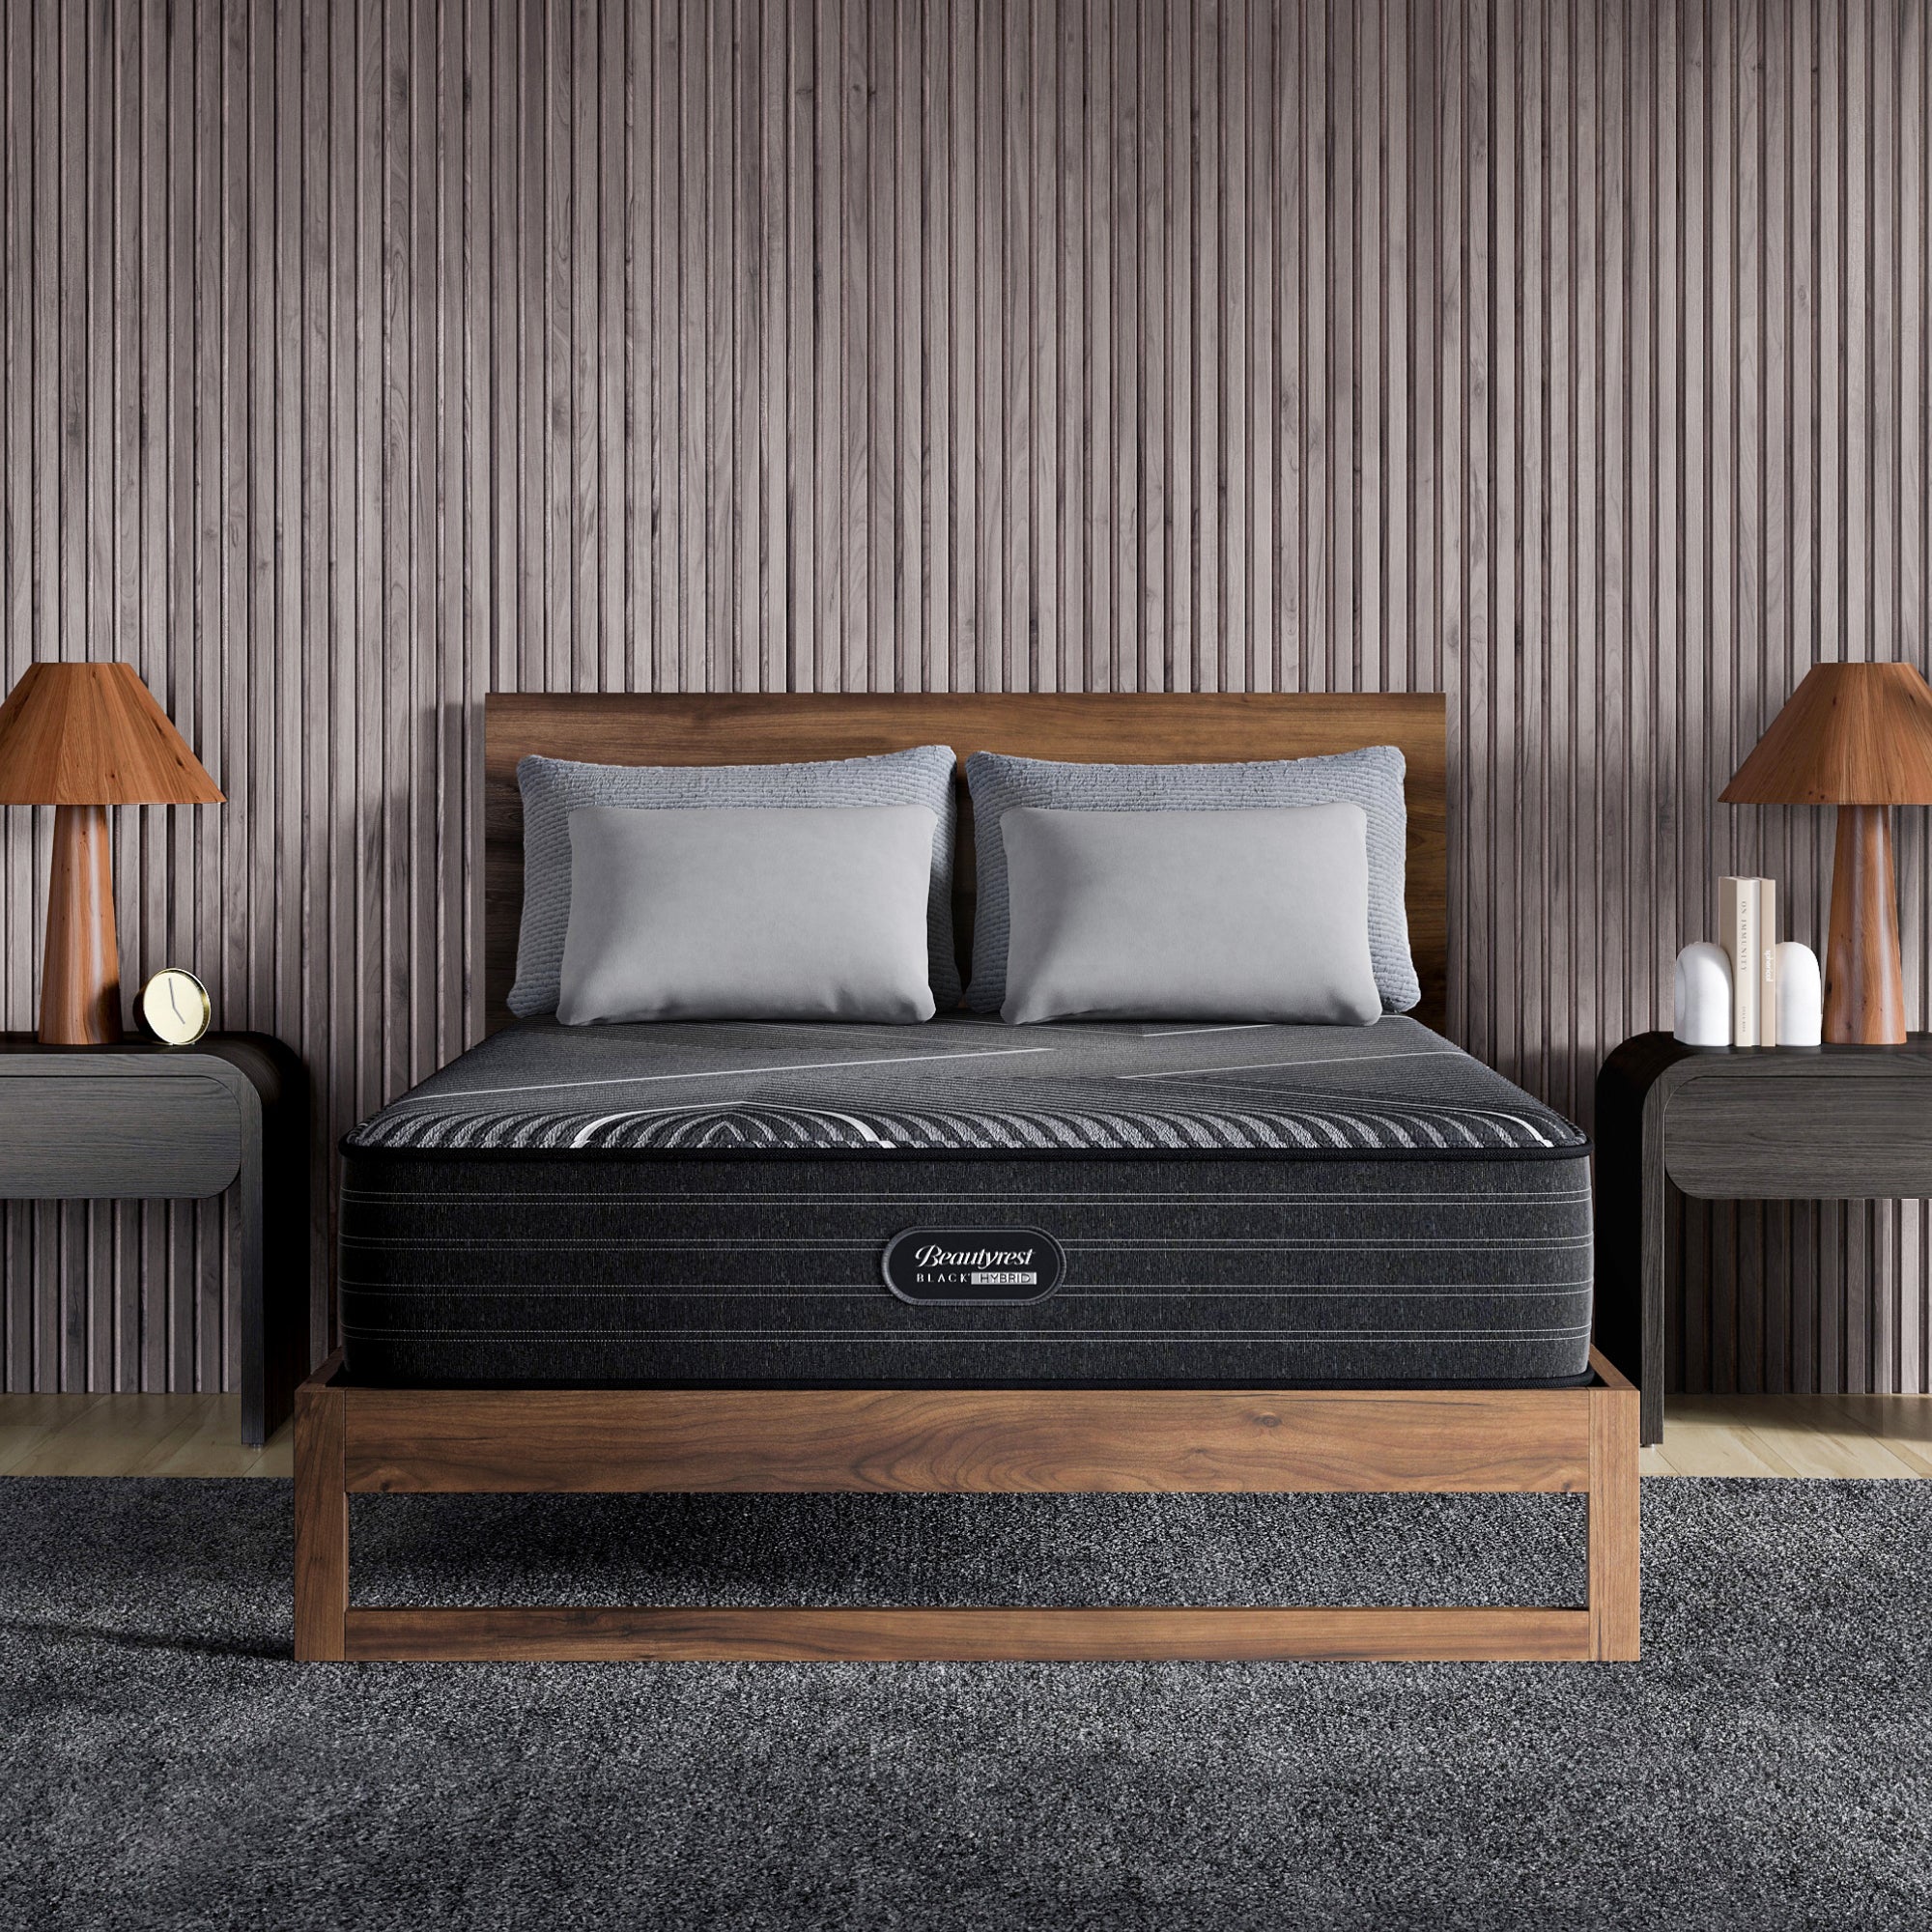 The Beautyrest Black hybrid plush mattress in a bedroom on a wooden bed || series: grand bx-class || feel: plush